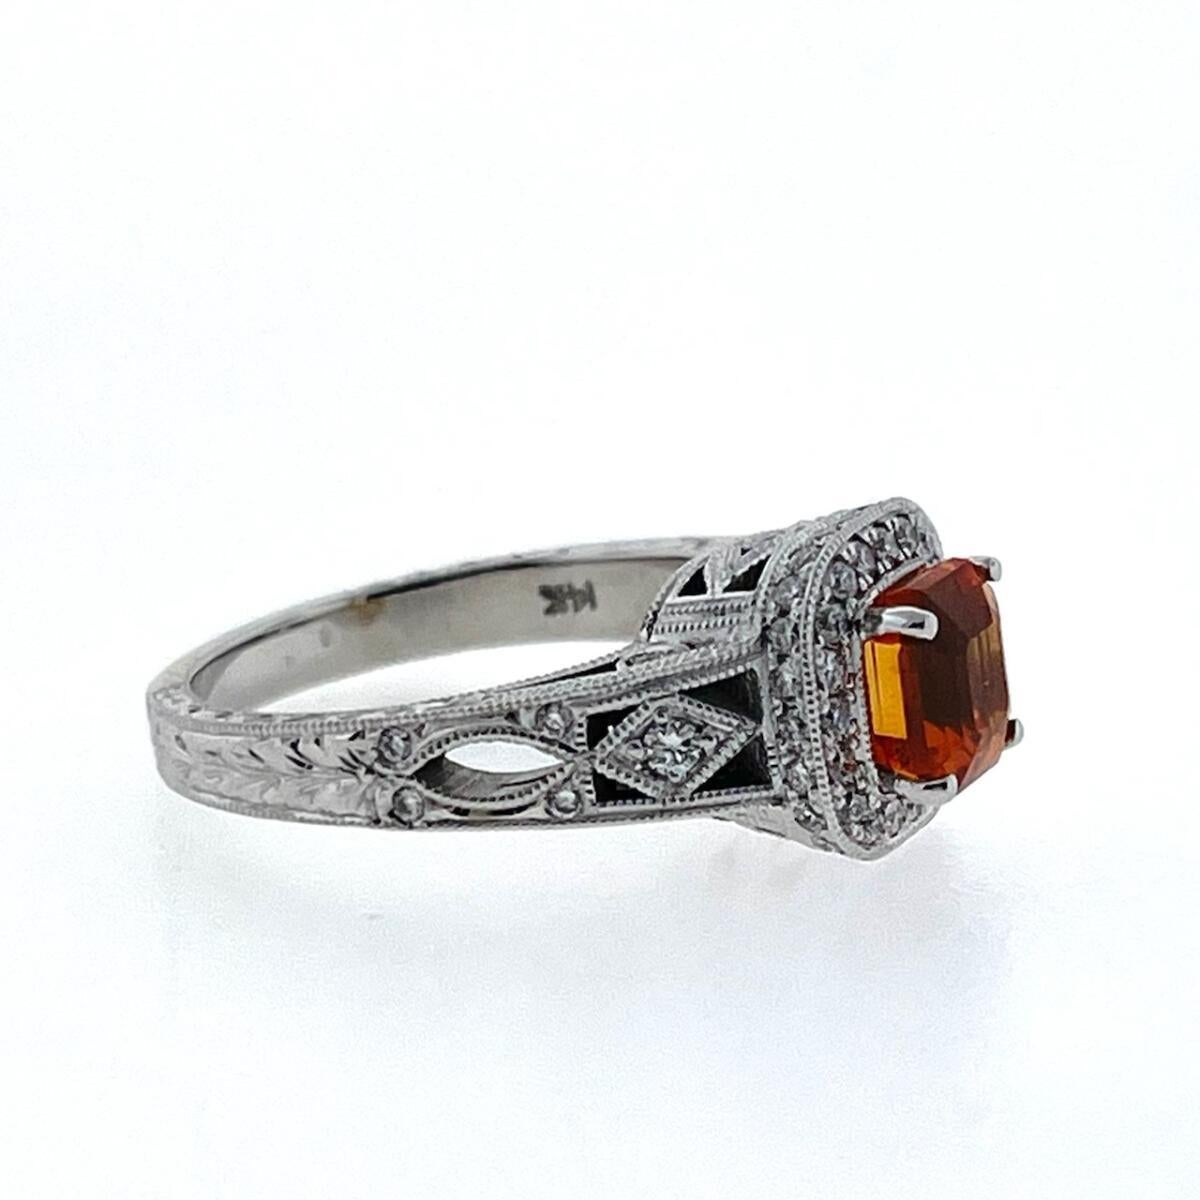 This 14K White Gold Diamond Ring has one 1.55ct Square Emerald Orange Sapphire Center with Twenty-Nine (29) Round Brilliant Cut Diamonds weighing 0.63ctw F/SI in Quality. The ring has milgrain edging and it is sized at a size 5.25 (can be resized). 